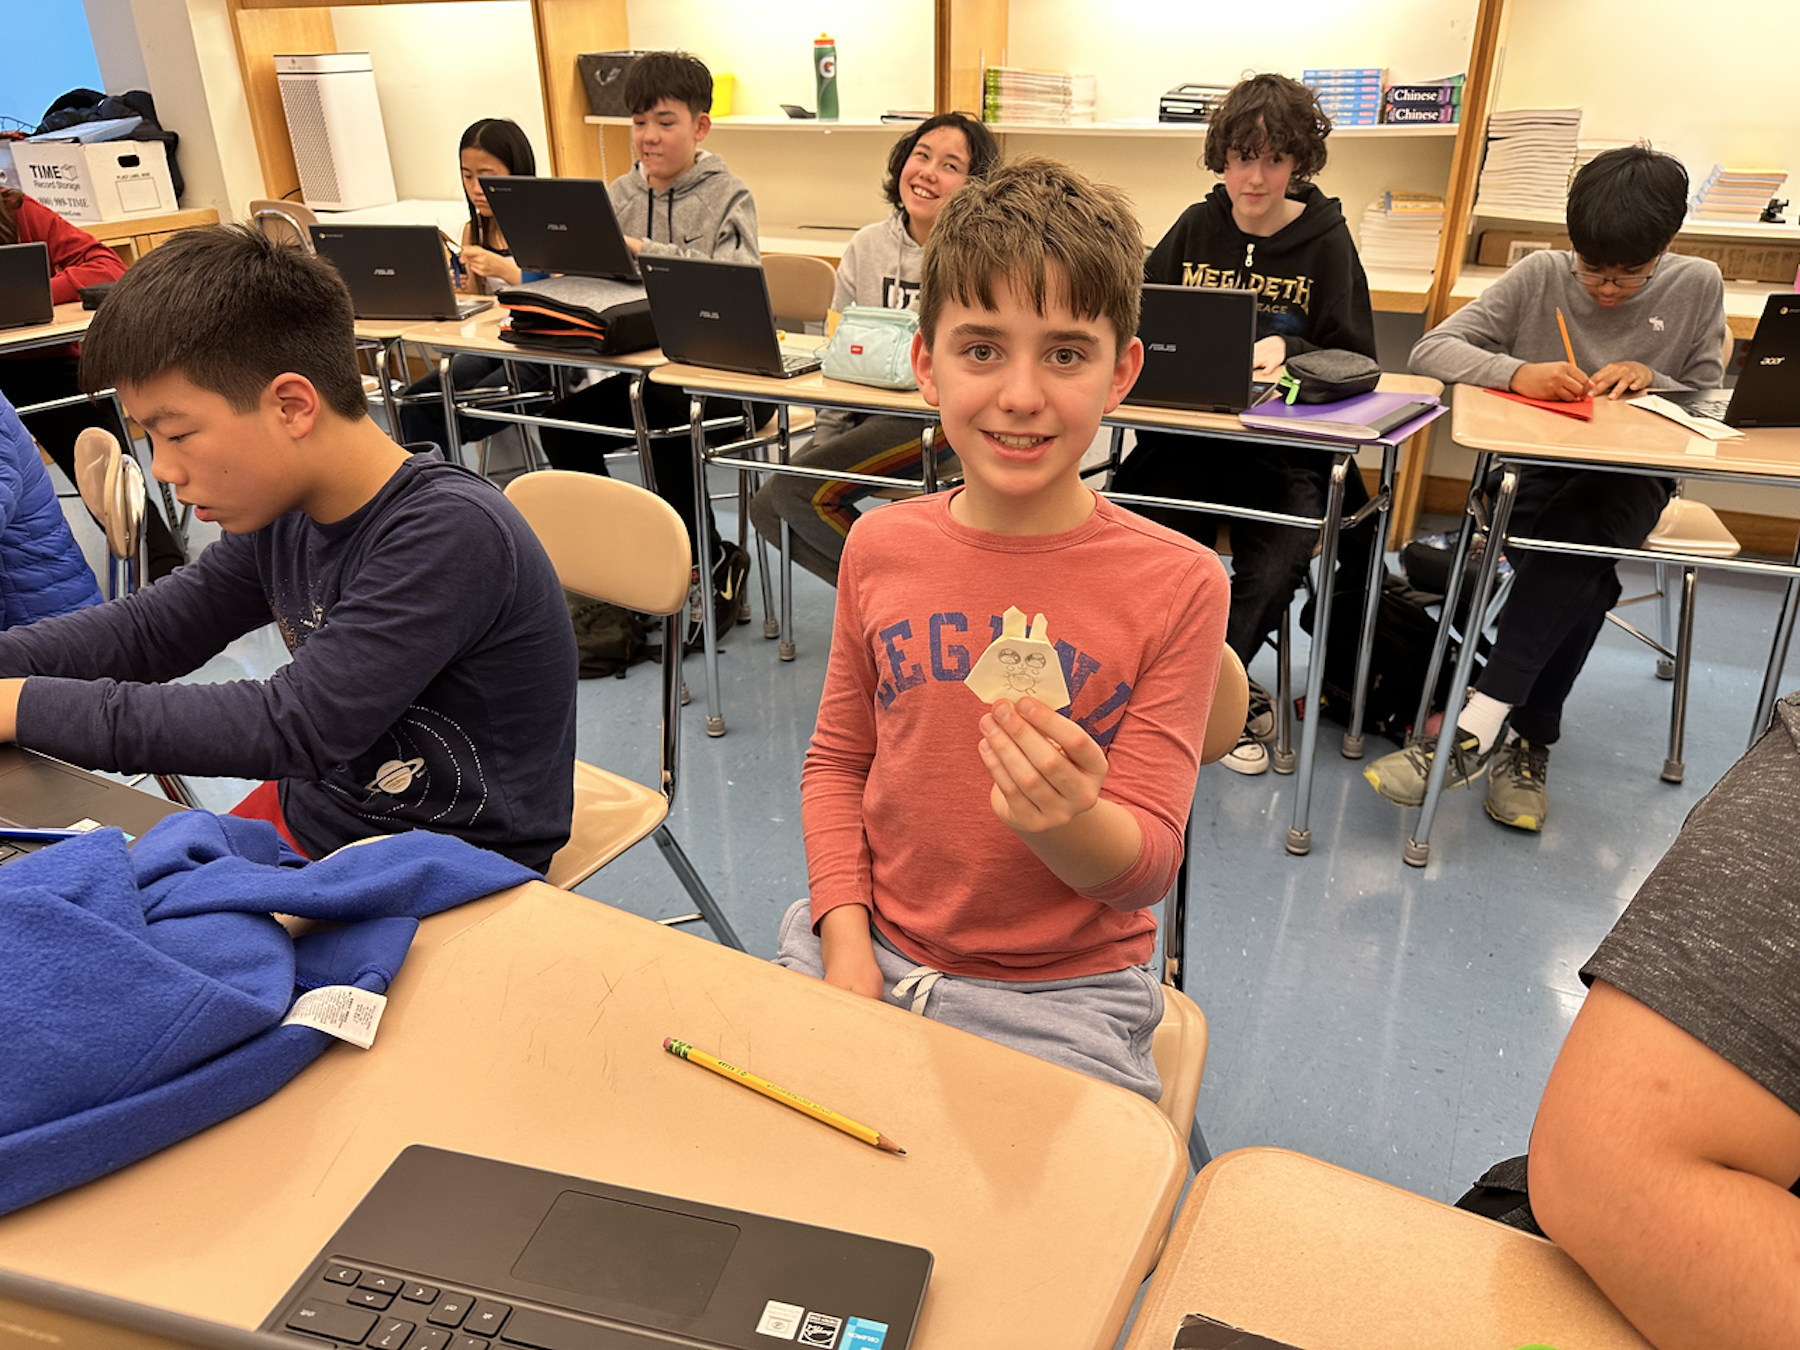 Fieldston Middle student holds up rabbit origami and smiles at the camera.